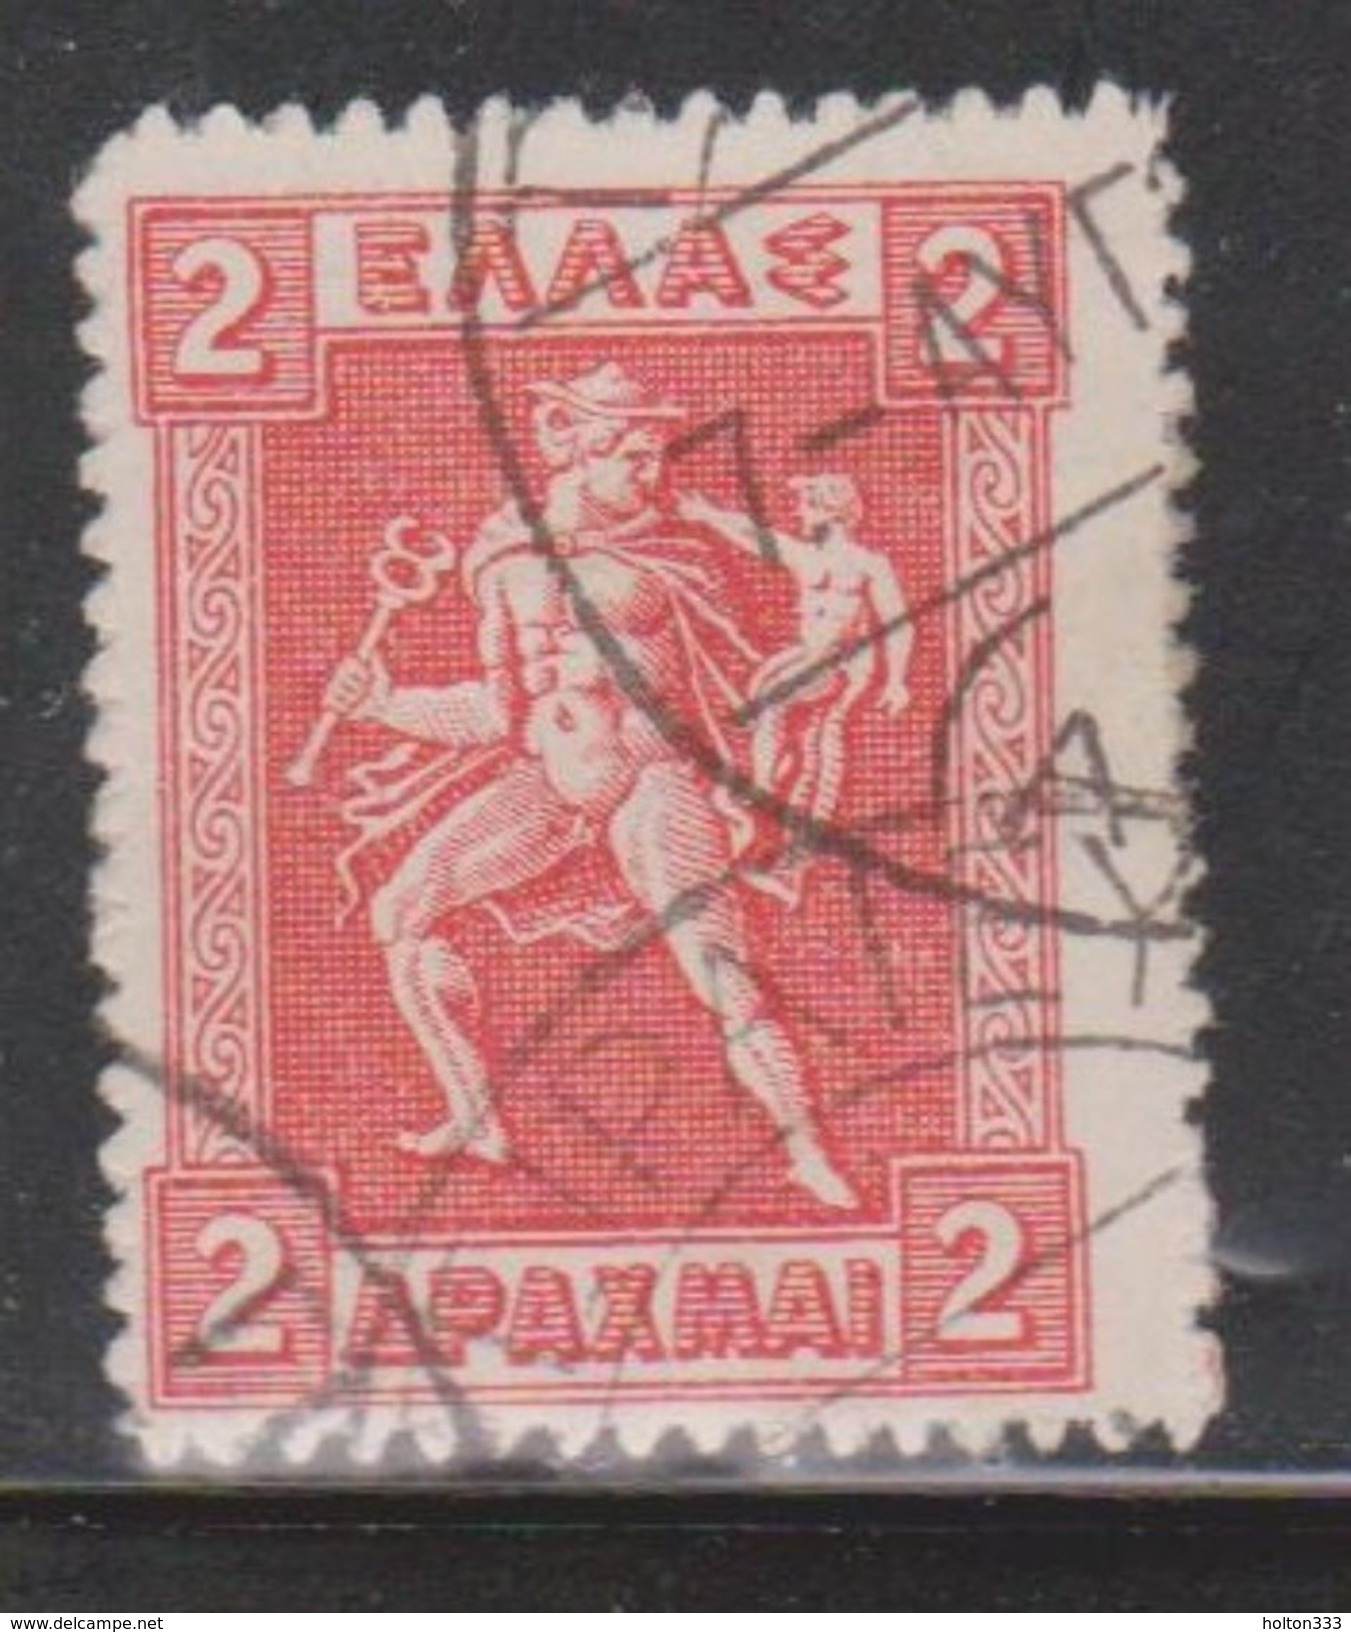 GREECE Scott # 209 - Hermes Carrying Infant Arcas - Used Stamps